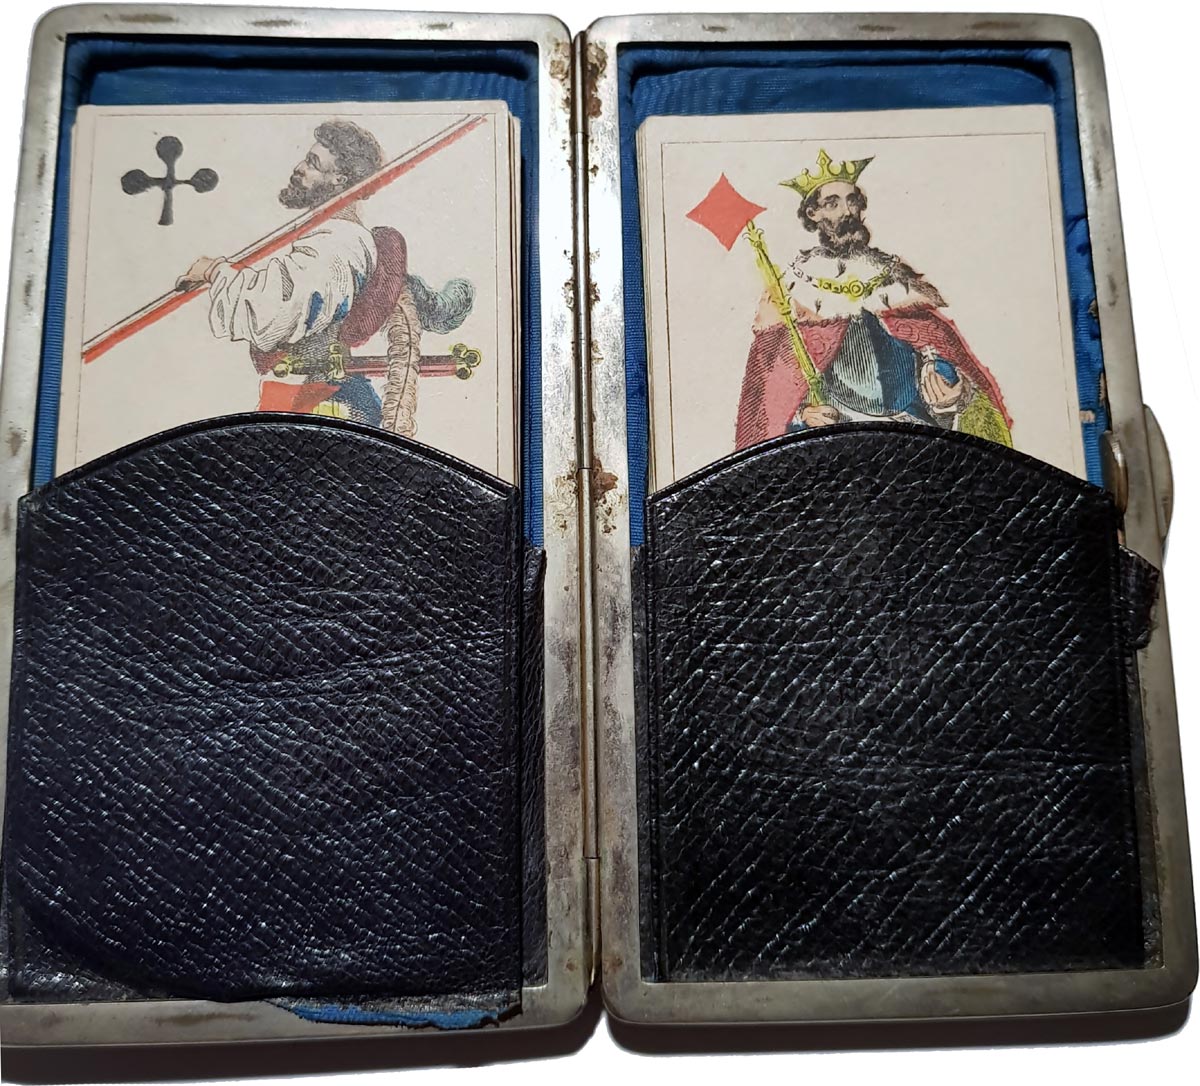 Details about   Skat-French Image-Nuremberg Playing Cards Publishing 7025 # NEW show original title 